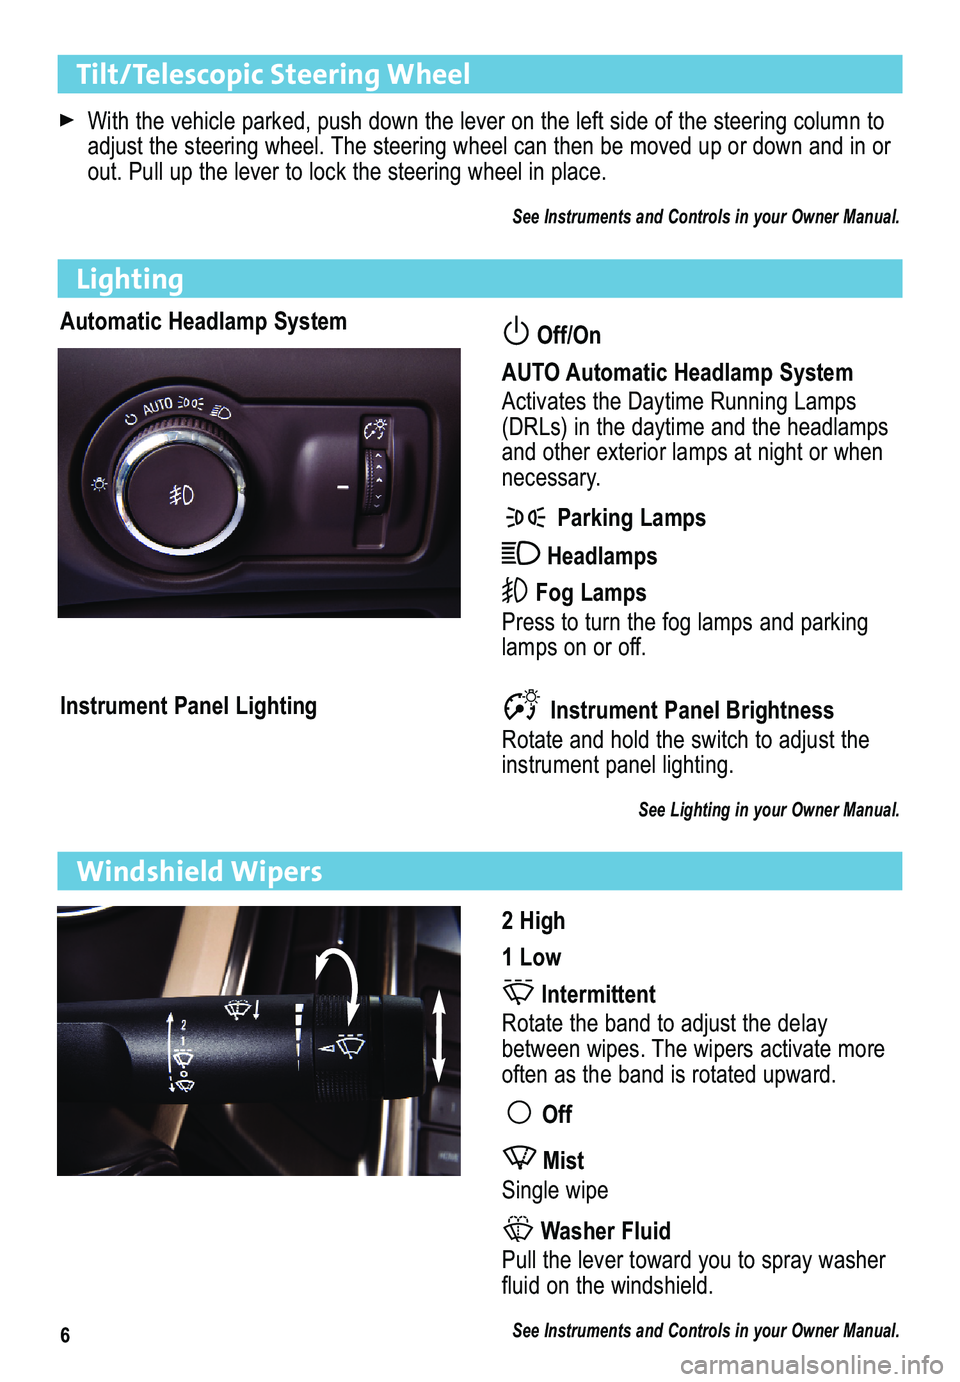 BUICK VERANO 2012  Get To Know Guide 6
Tilt/Telescopic Steering Wheel 
With the vehicle parked, push down the lever on the left side of the ste\
ering column to
adjust the steering wheel. The steering wheel can then be moved up or down a